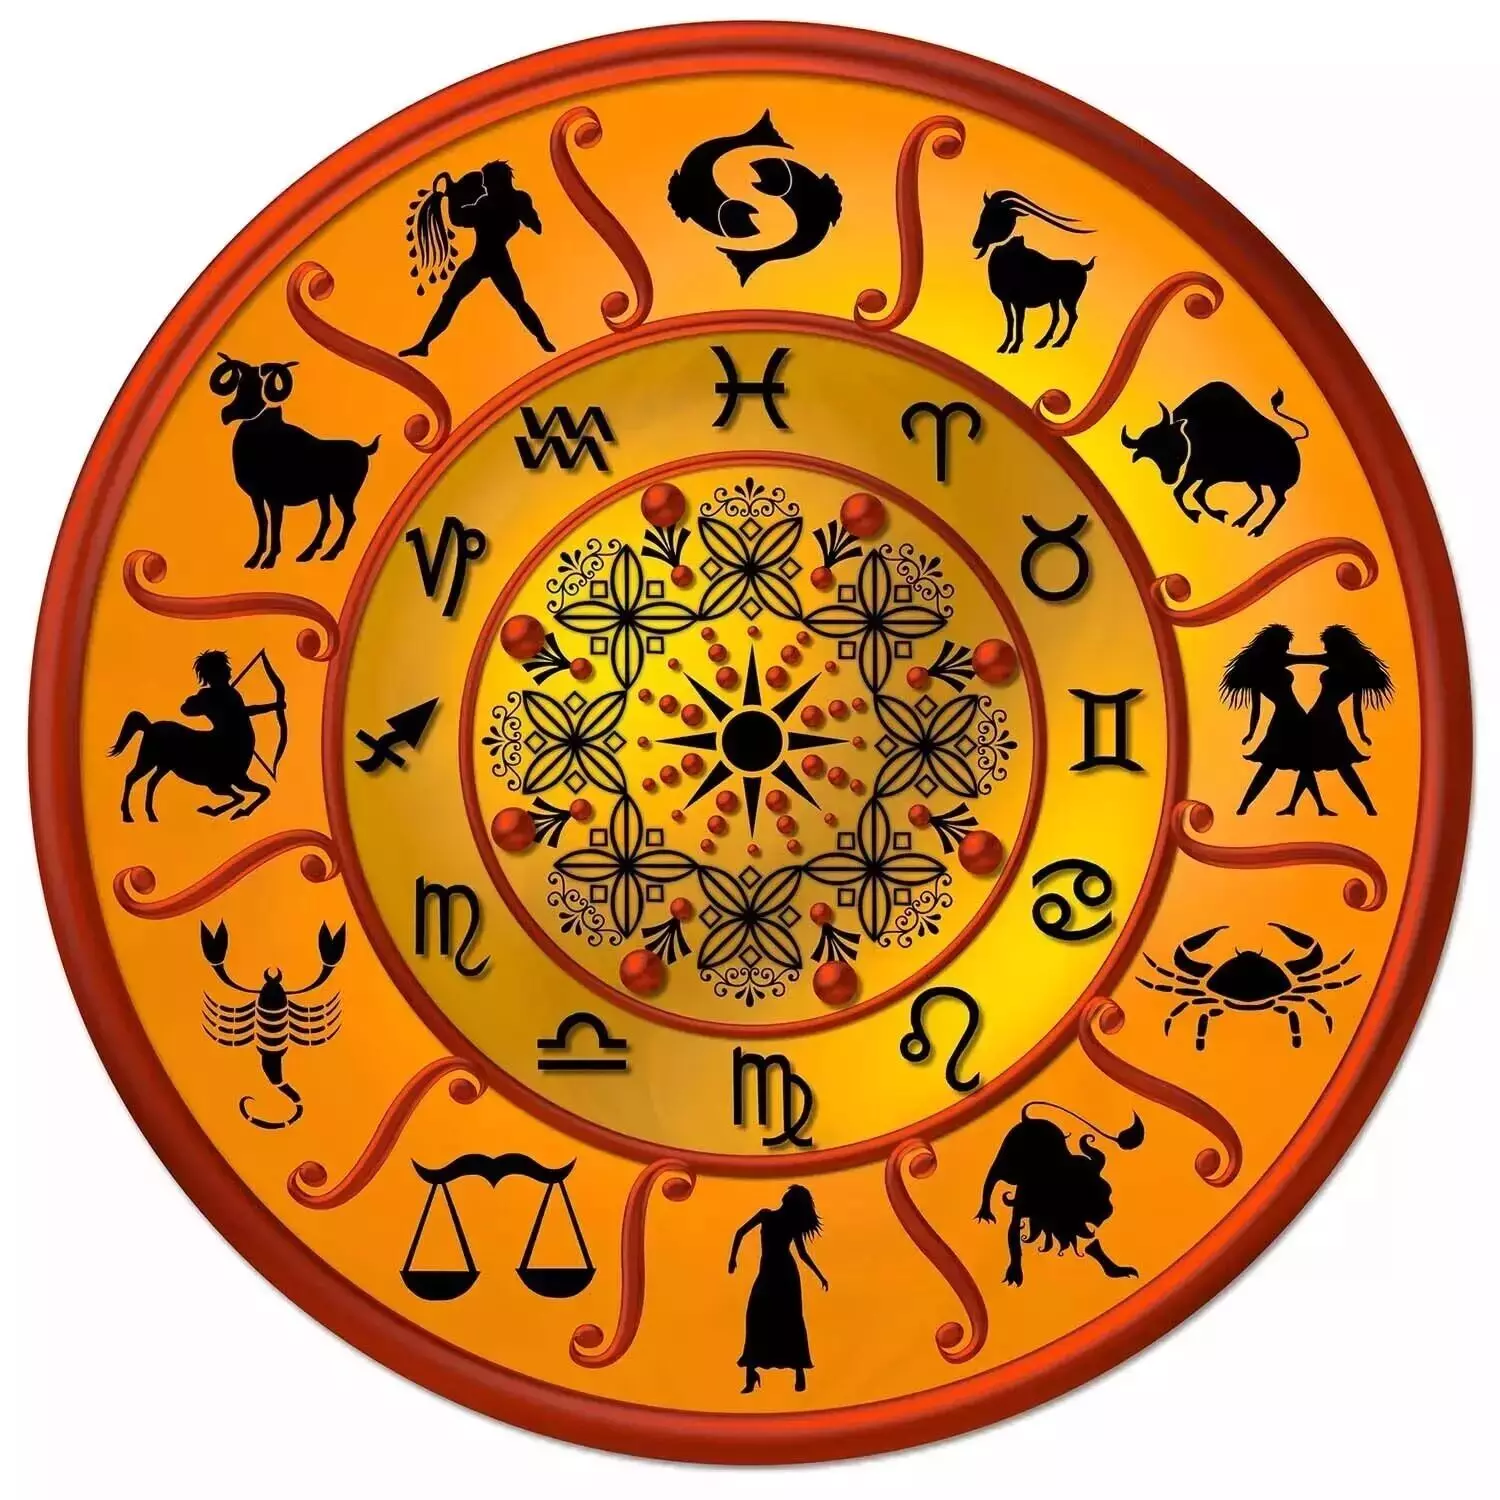 16 May – Know your todays horoscope